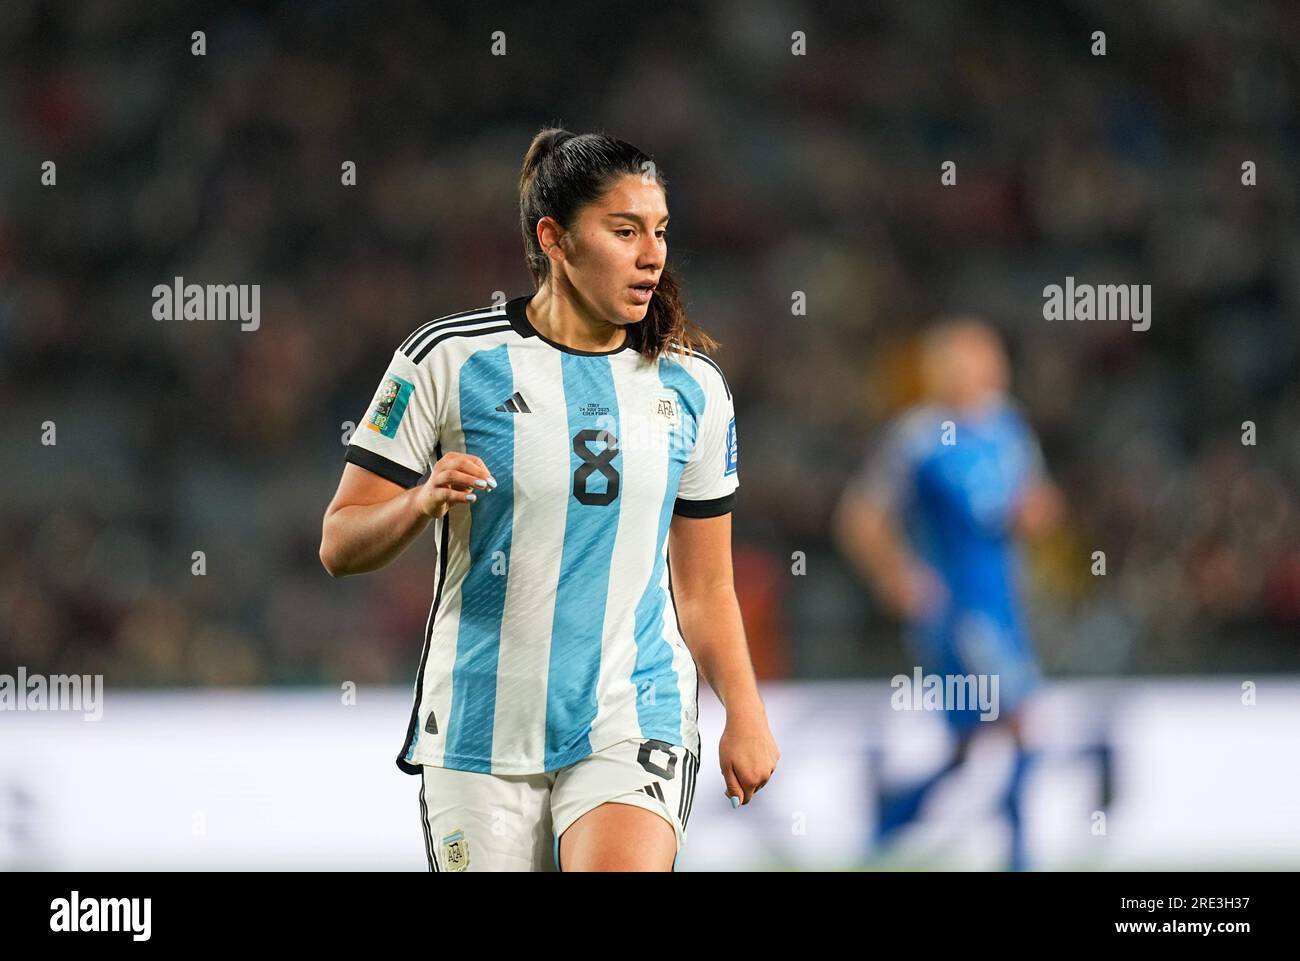 July 24 2023: Daiana Falfan (Argentina) looks on during a Group G - FIFA Women's World Cup Australia & New Zealand 2023 game, Italy vs Argentina, at Eden Park, Auckland, New Zealand. Kim Price/CSM Stock Photo